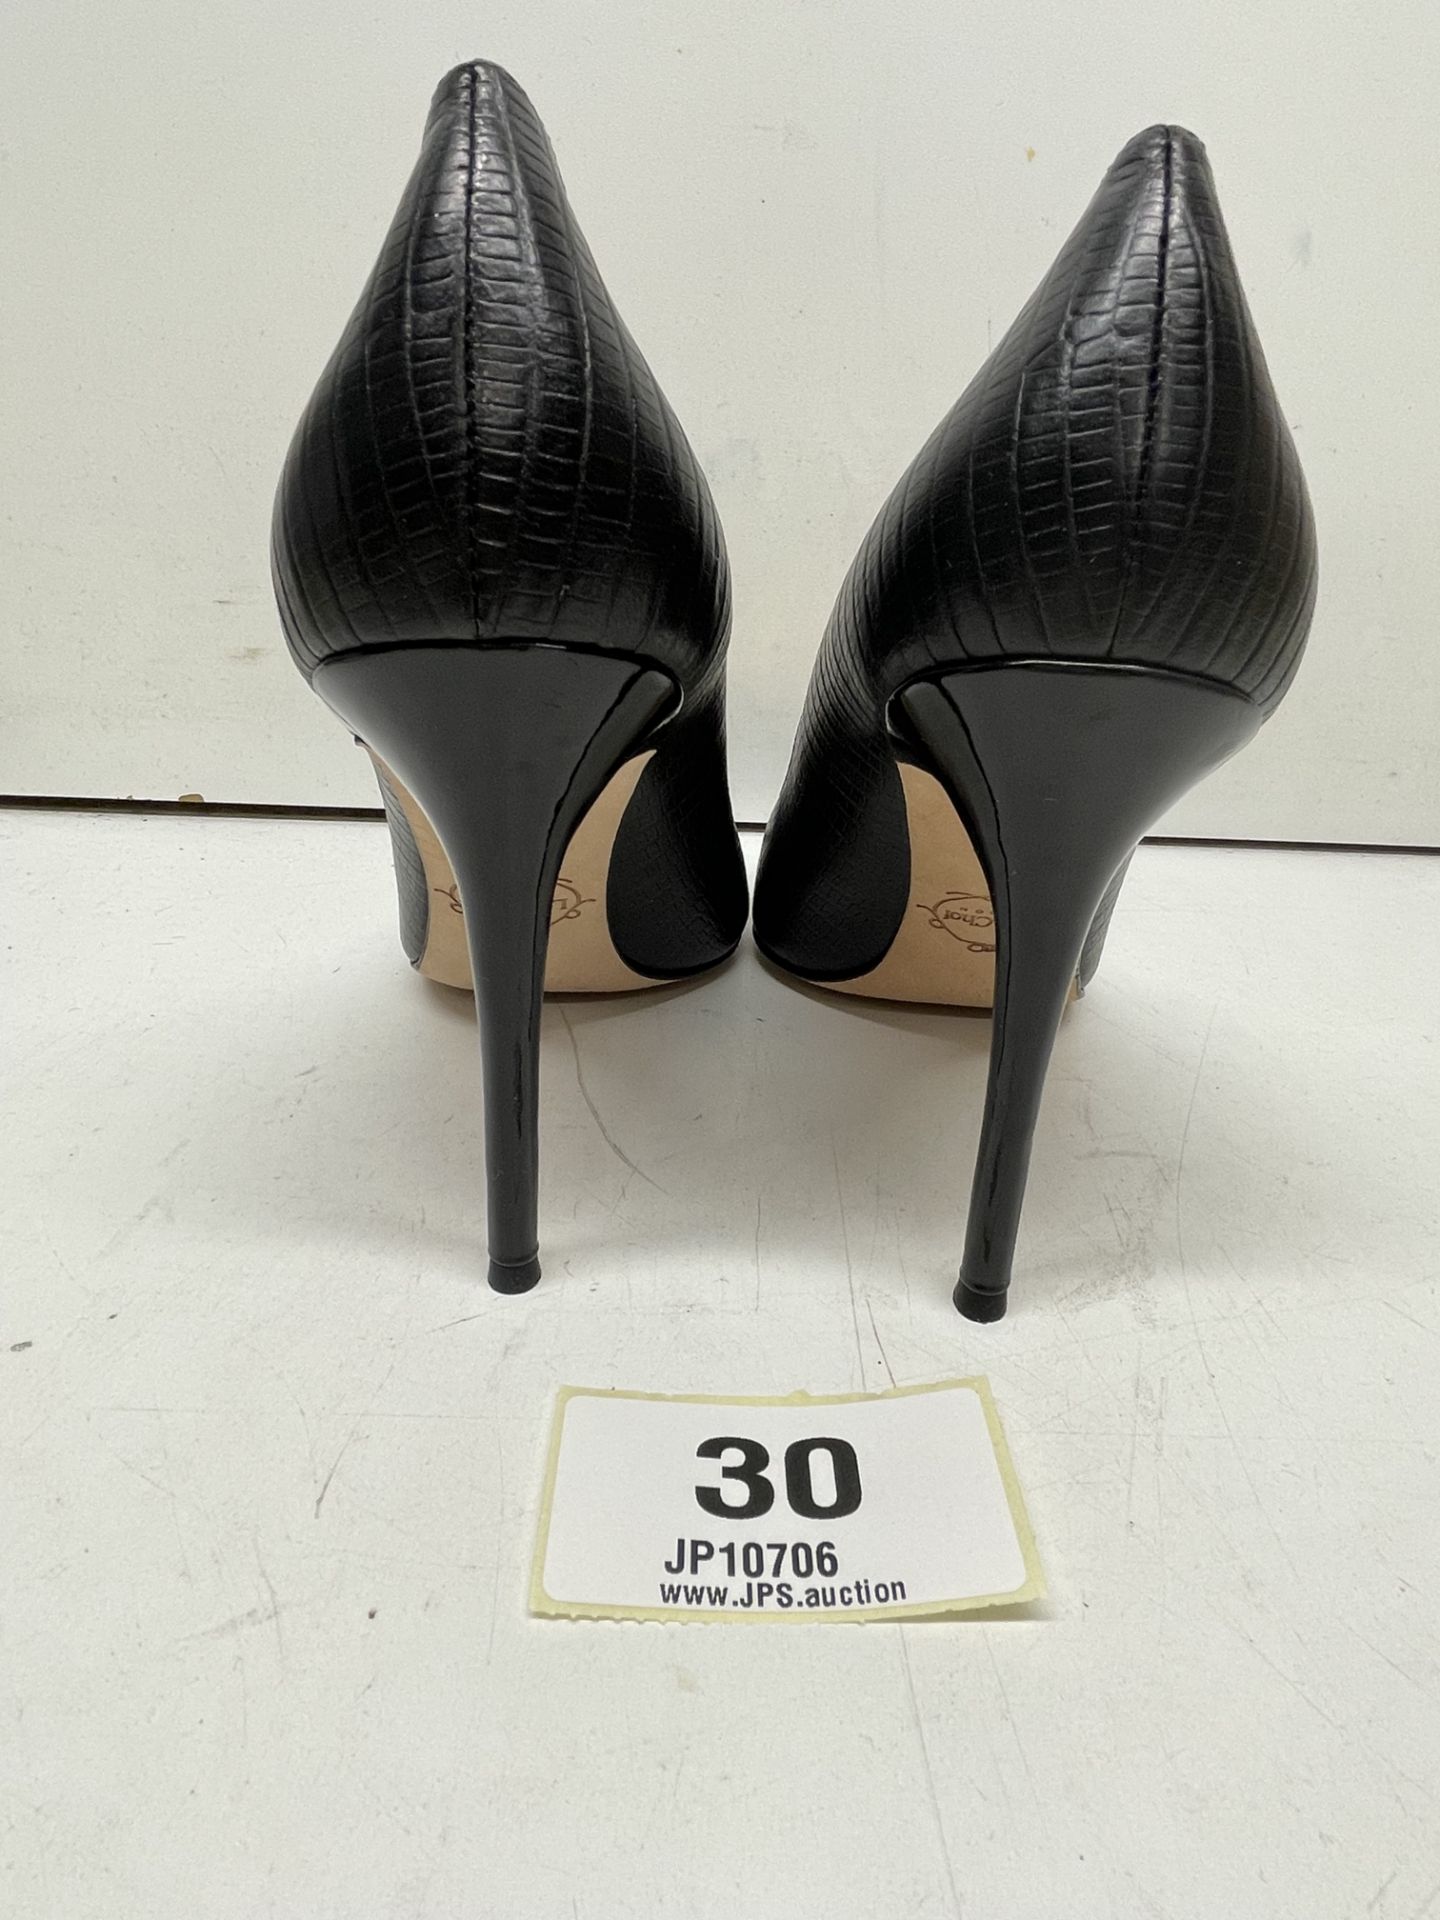 Ex-Display Lucy Choi Stiletto Heels | Eur 37 - Image 3 of 4